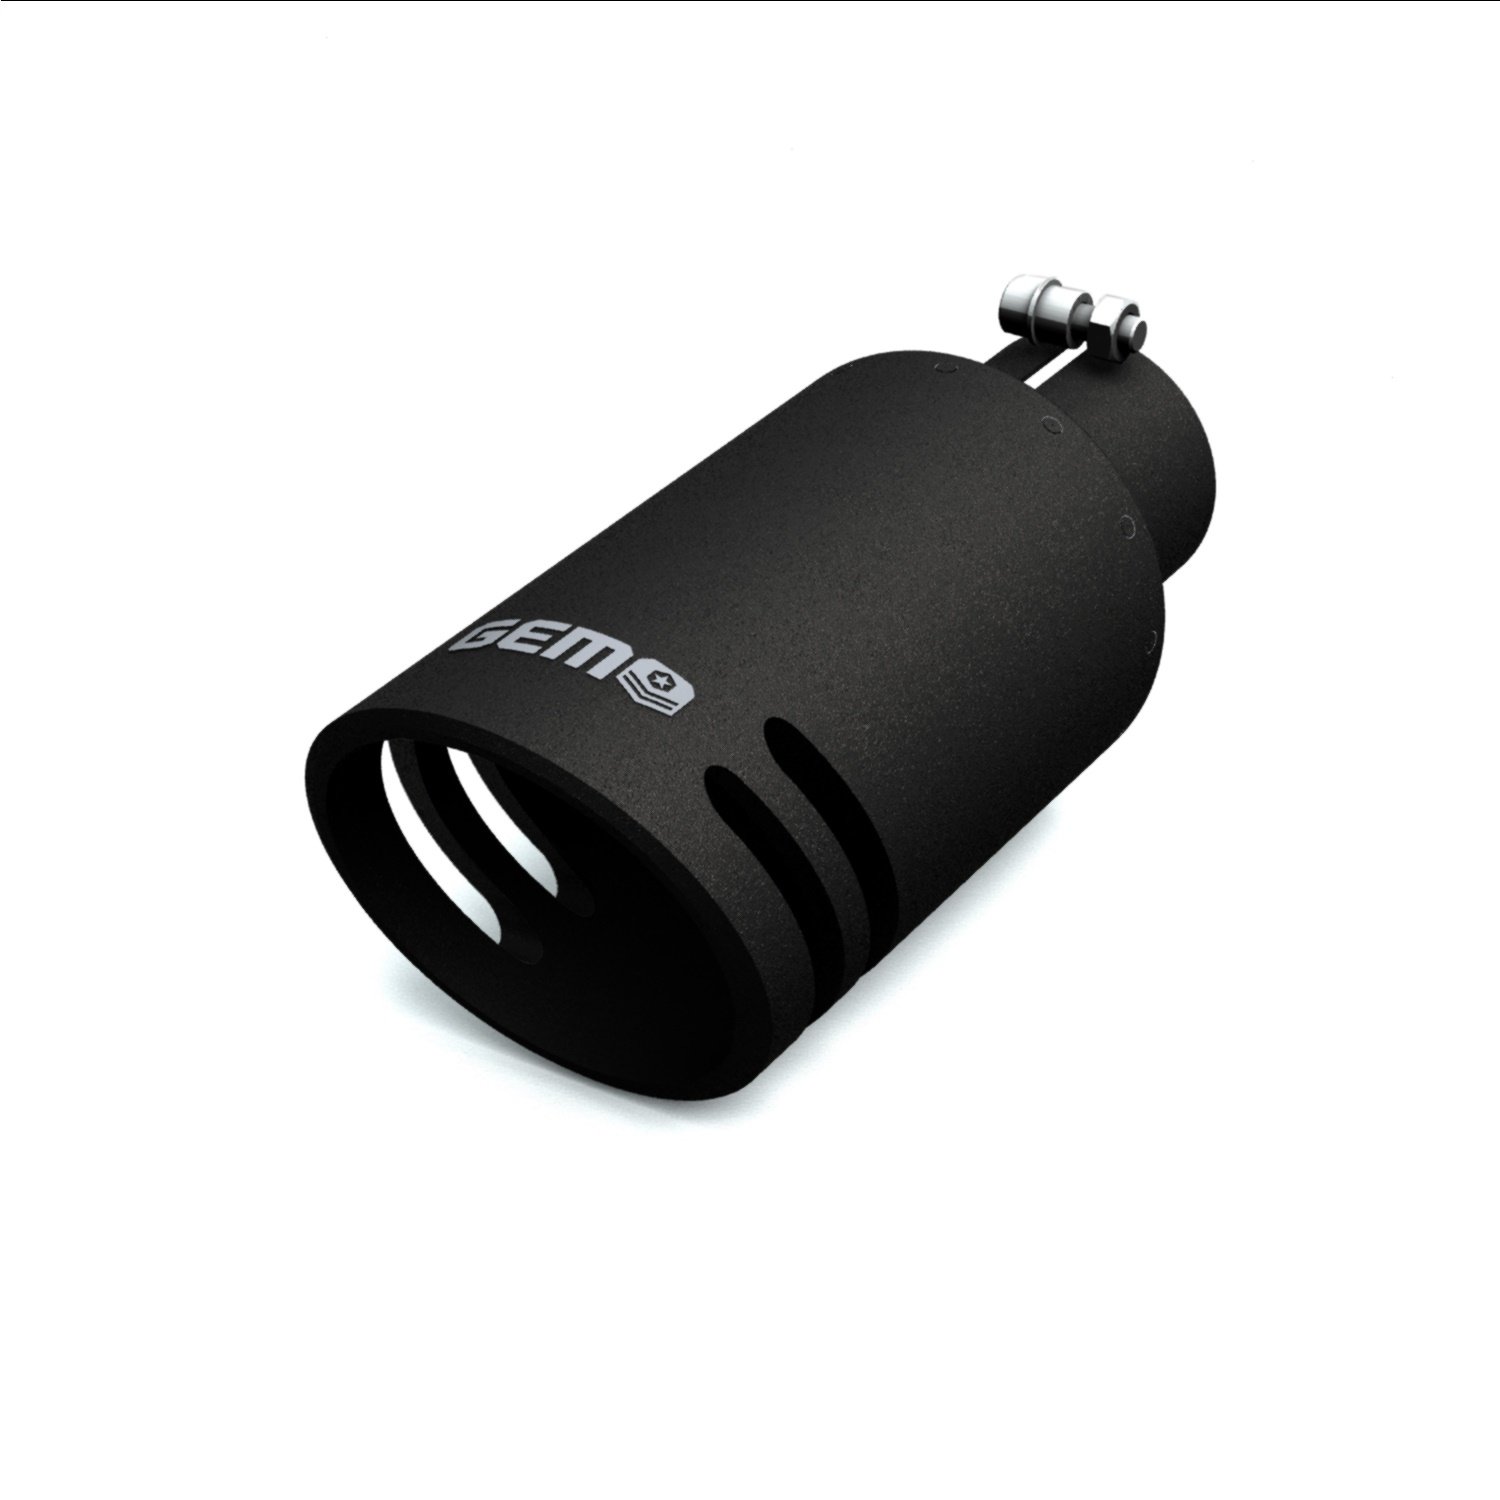 GEM Billet Exhaust Tip, 4 in. Inlet/5 in. Outlet x 12 in. Length, Aluminum/304 Stainless Steel, SILENCER Cut [Black Finish]